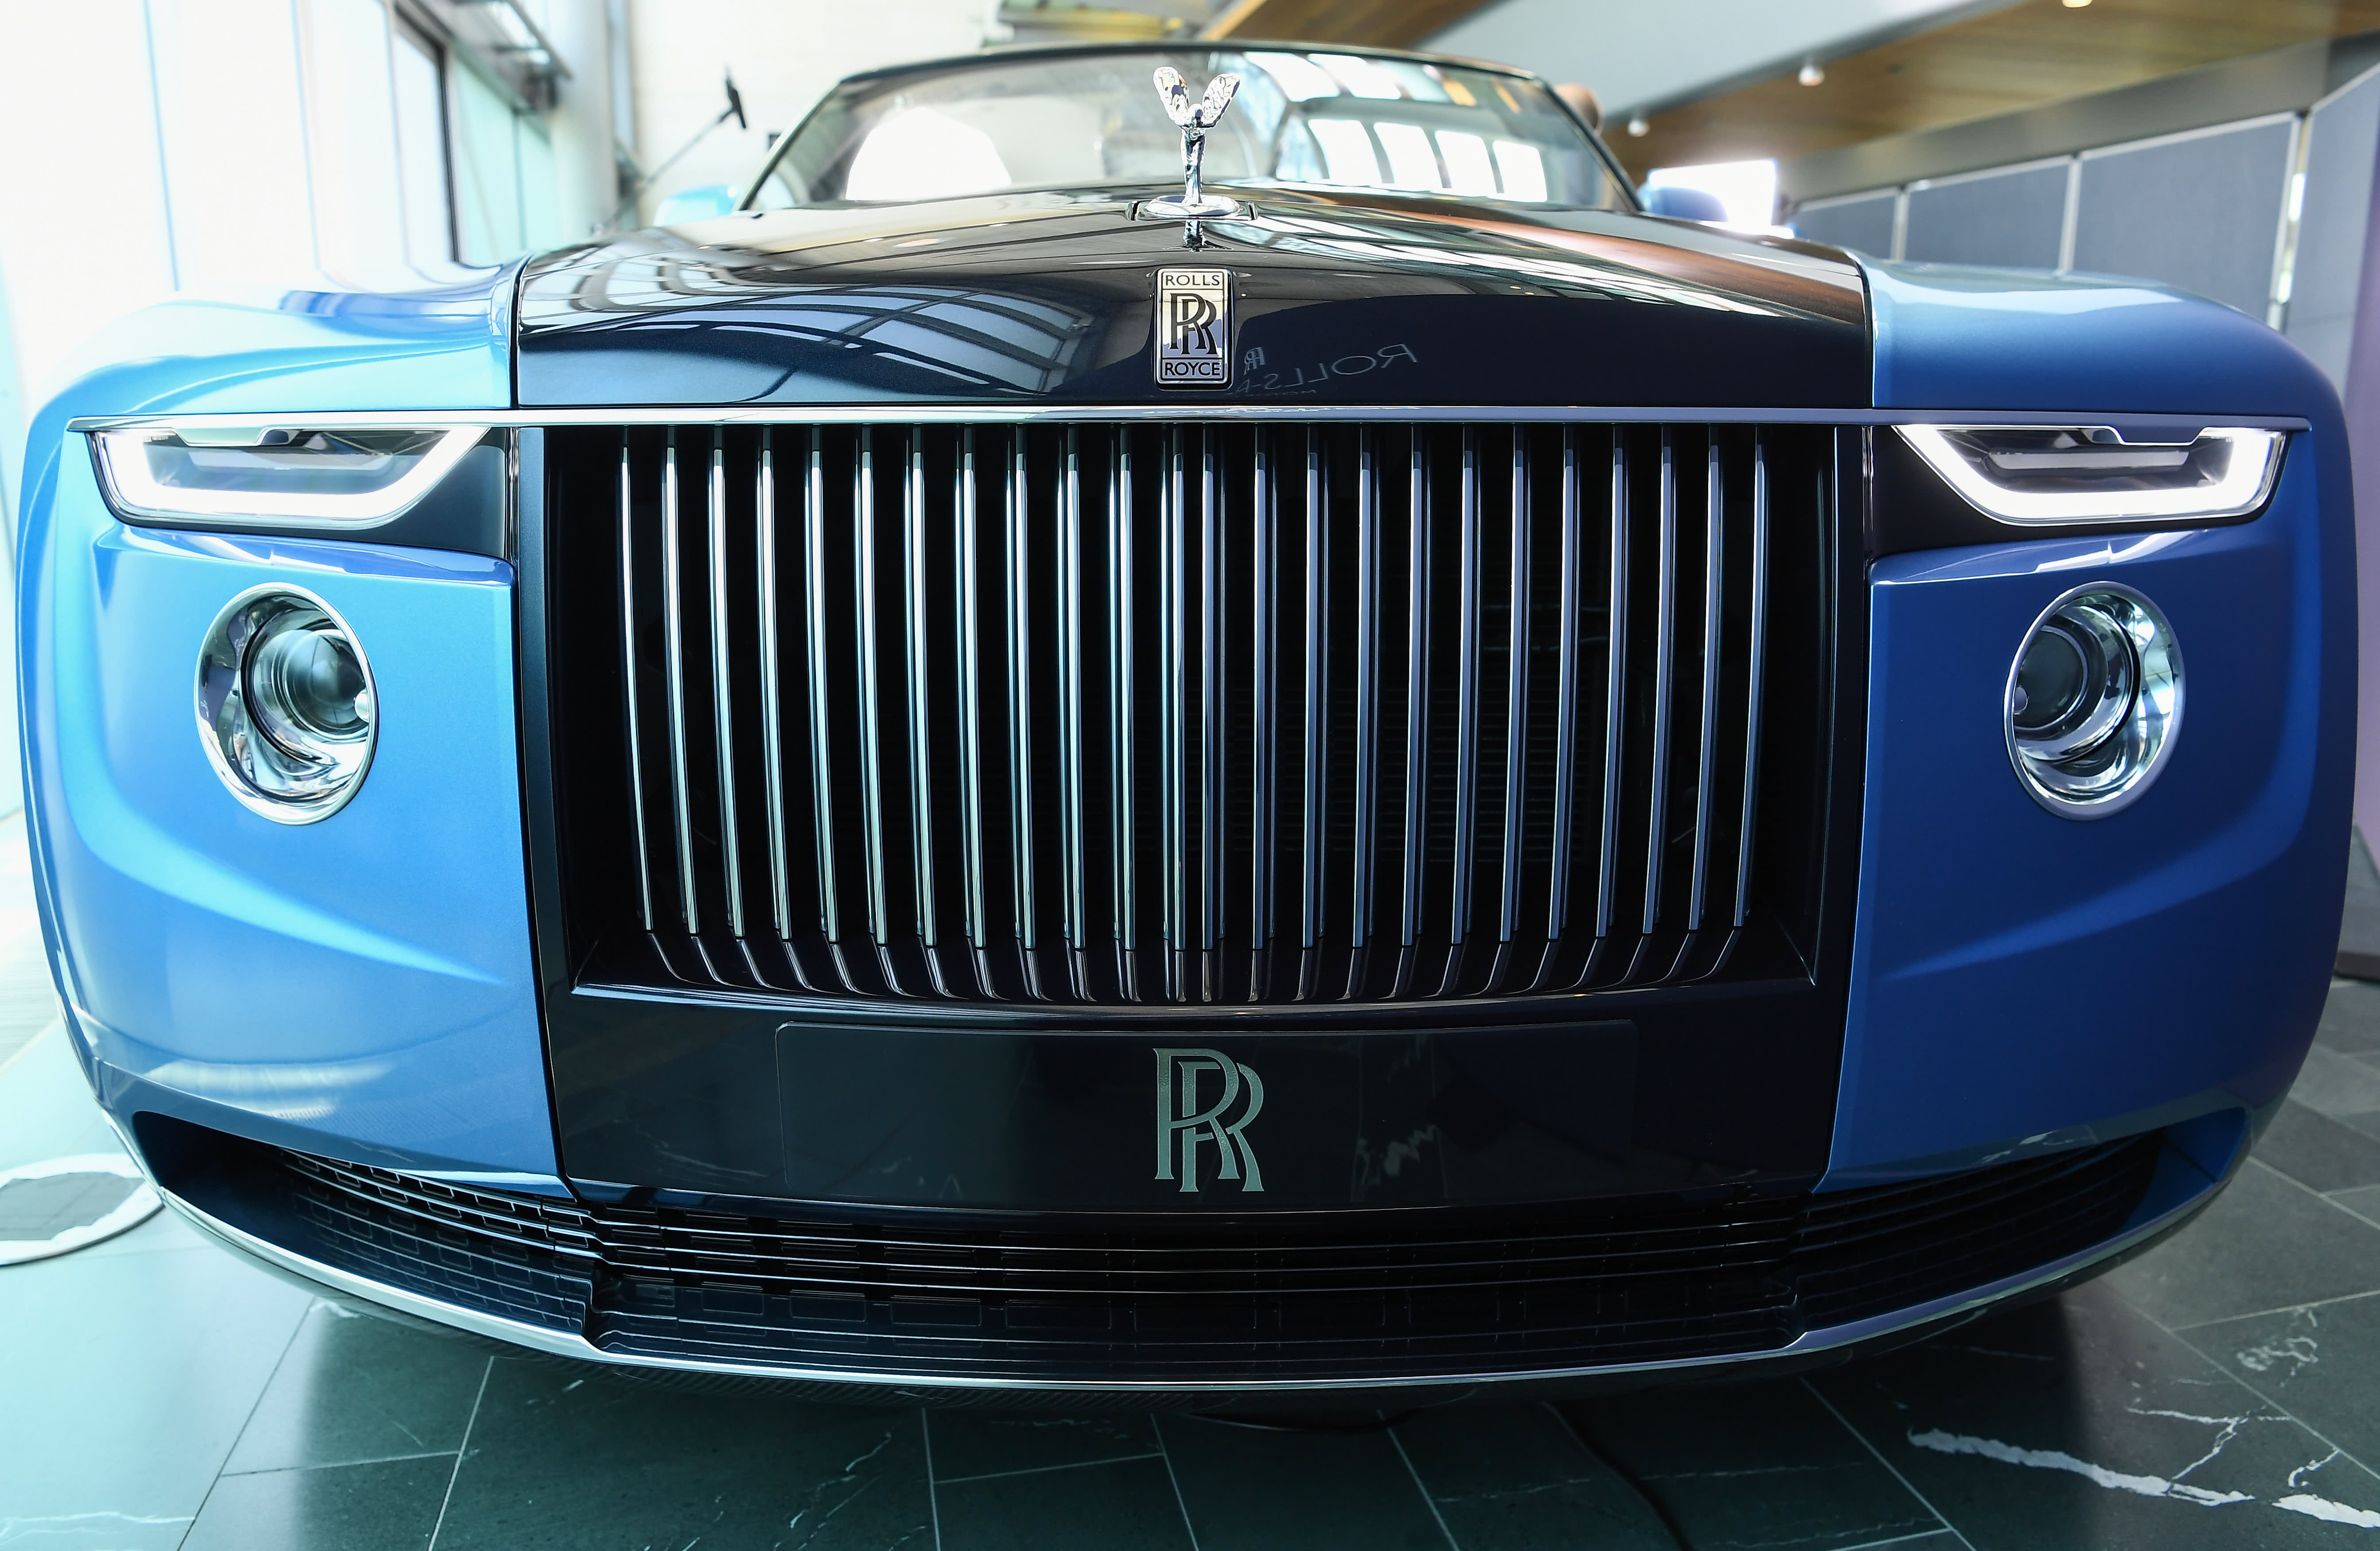 Detail Picture Of A Rolls Royce Nomer 7